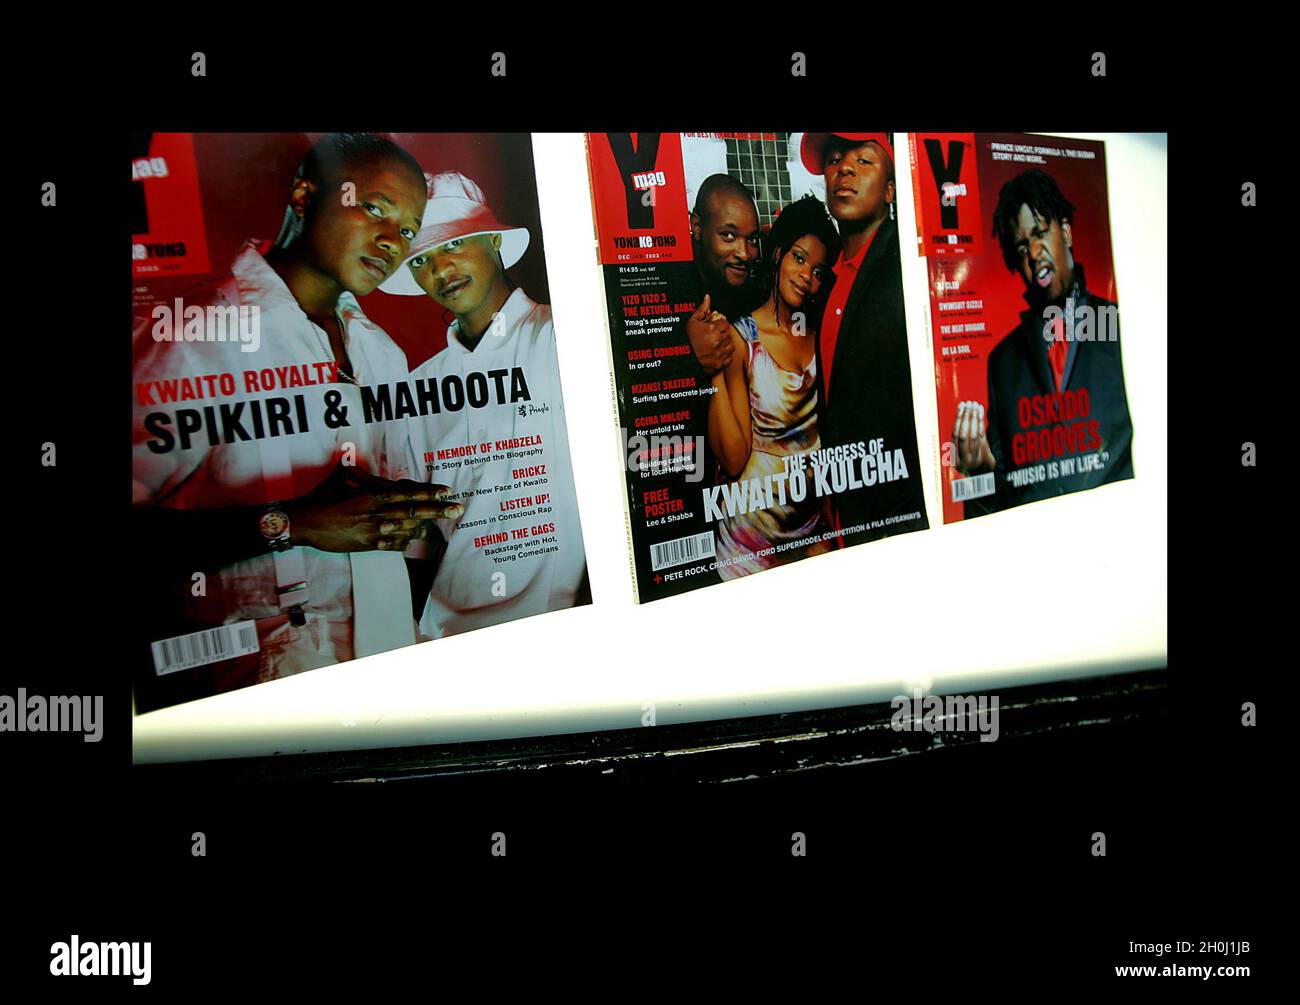 The Kwaito Generals....They're on radio, on magazine covers and have became celebrities in their own right. Straight from the townships and proud of it. This is interesting when one considers that the township was created to keep a ready supply of cheap labour under control by the apartheid government. Kwaito cries out to impoverished youths in the townships and has given young black artists a chance to shine. Stock Photo